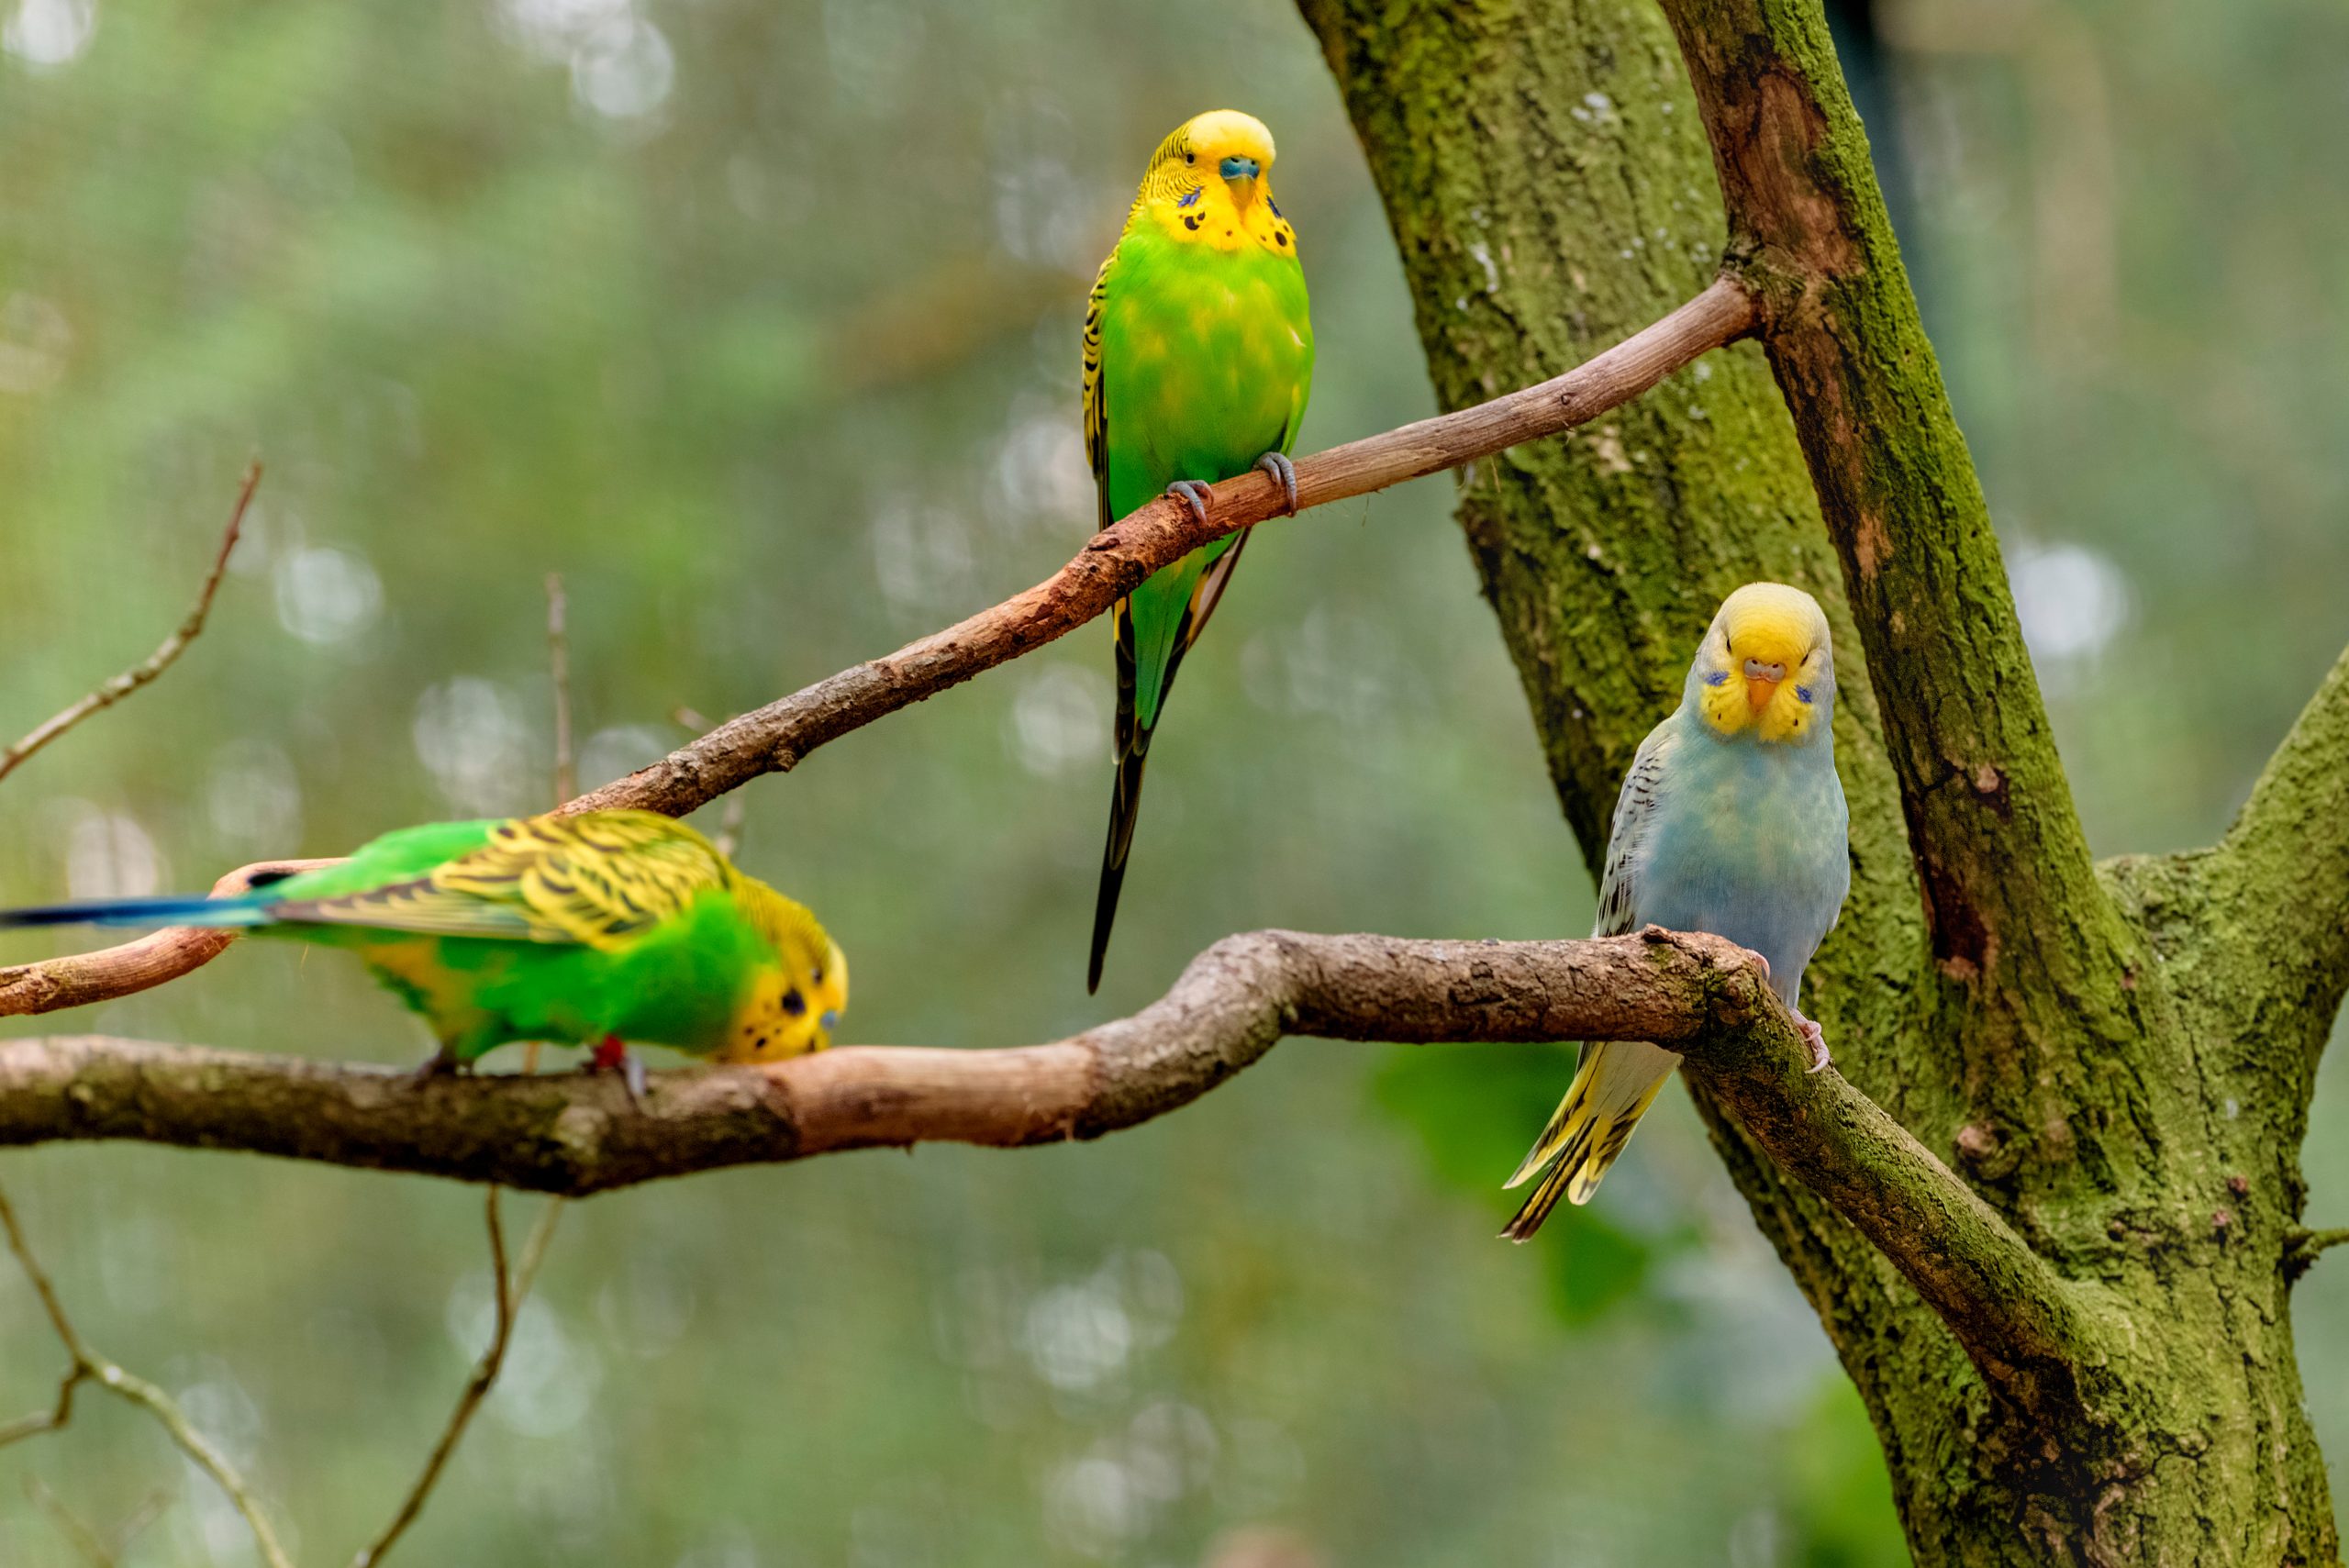 Three Budgerigars, Long Tailed Parrots, With Yellow, Blue, Green Feathers Are Sitting On The Branch. Melopsittacus Undulatus